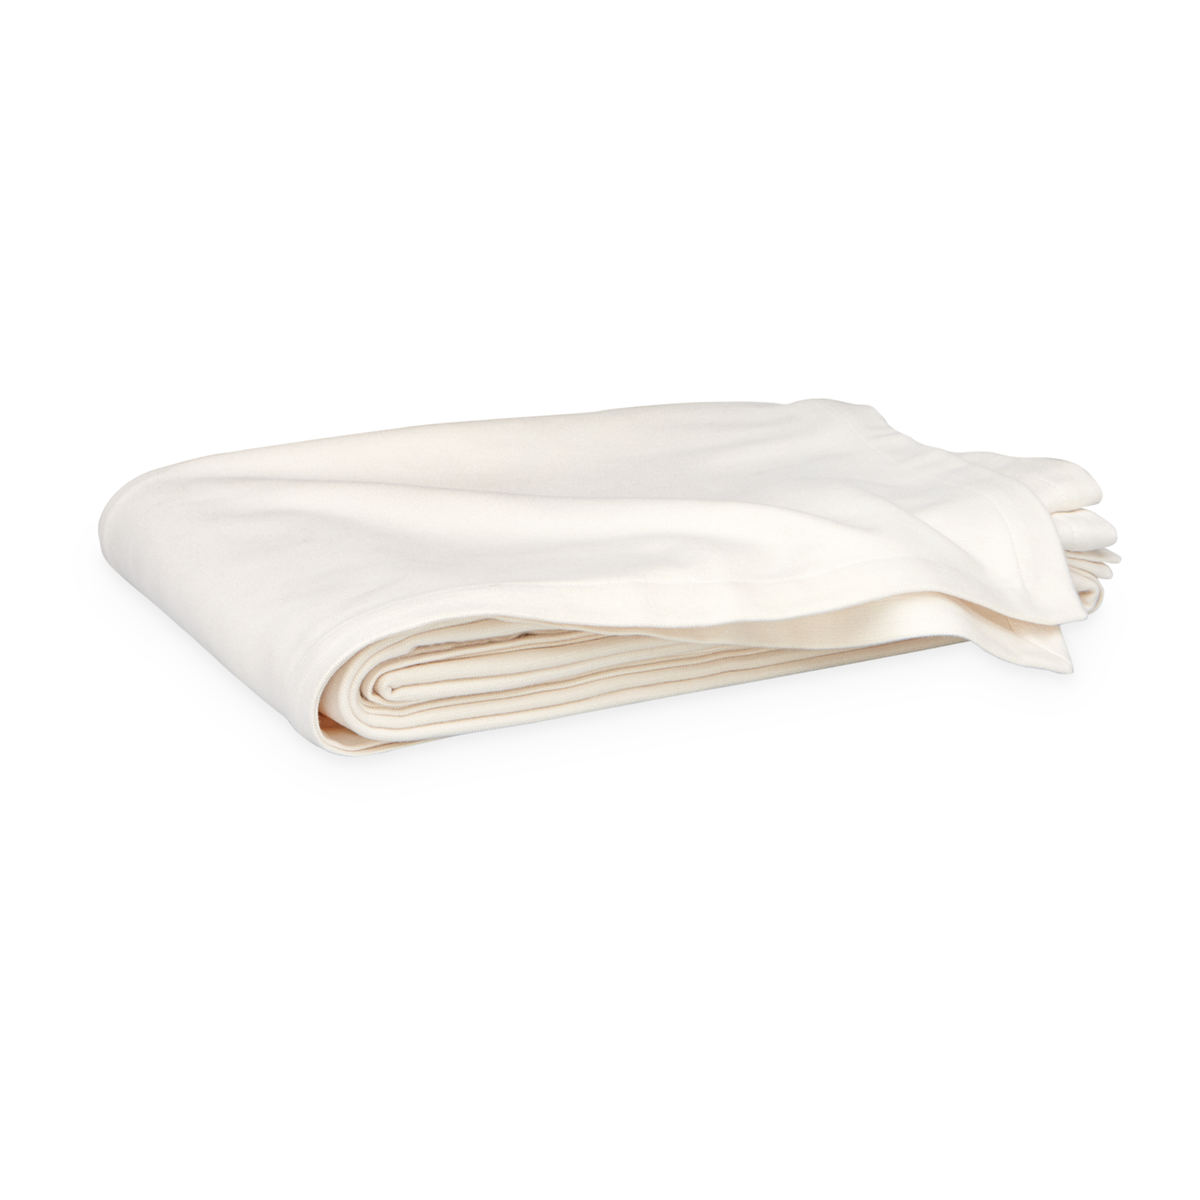 Folded Blanket of Matouk Dream Modal Collection in Oyster Color